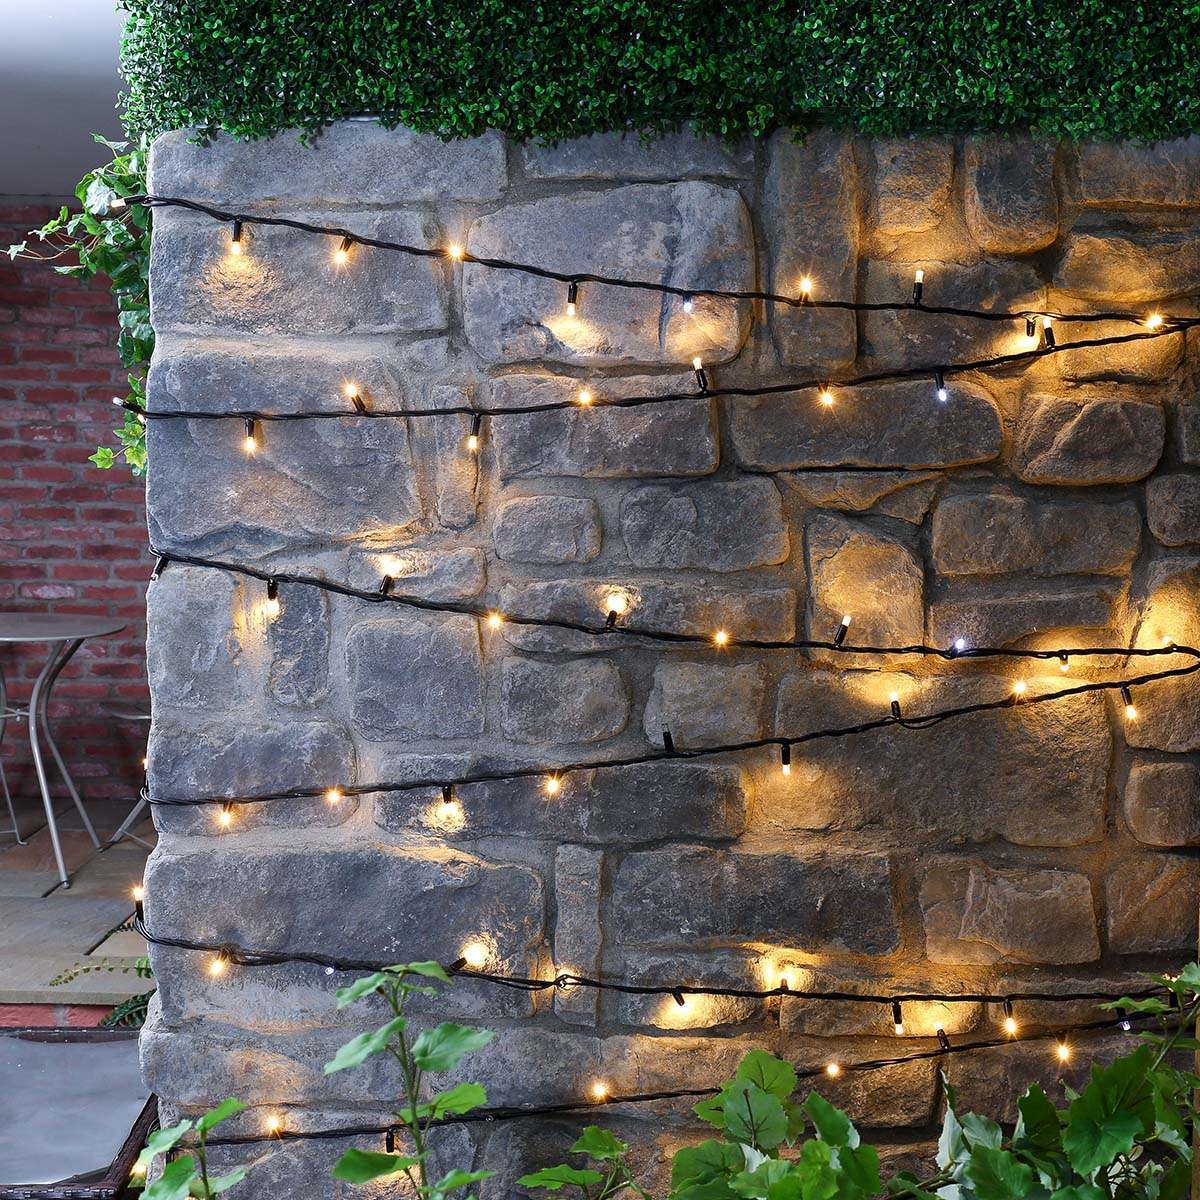 How To Install Lights On A Brick Wall, How To Hang Patio Lights On Brick Wall